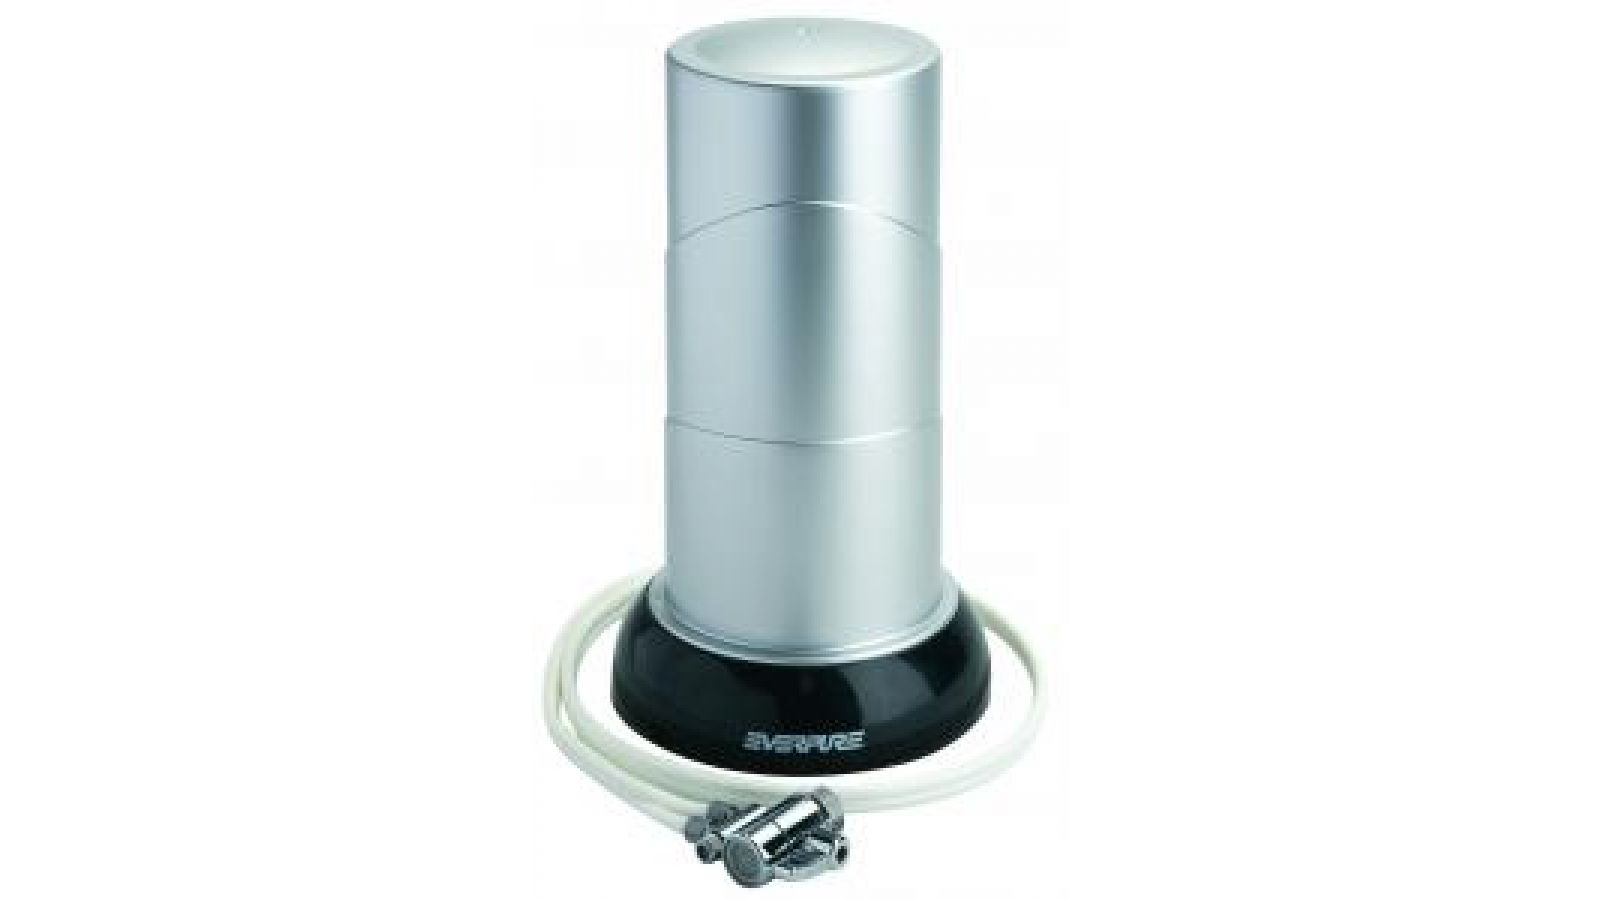 Countertop Drinking Water System by Everpure